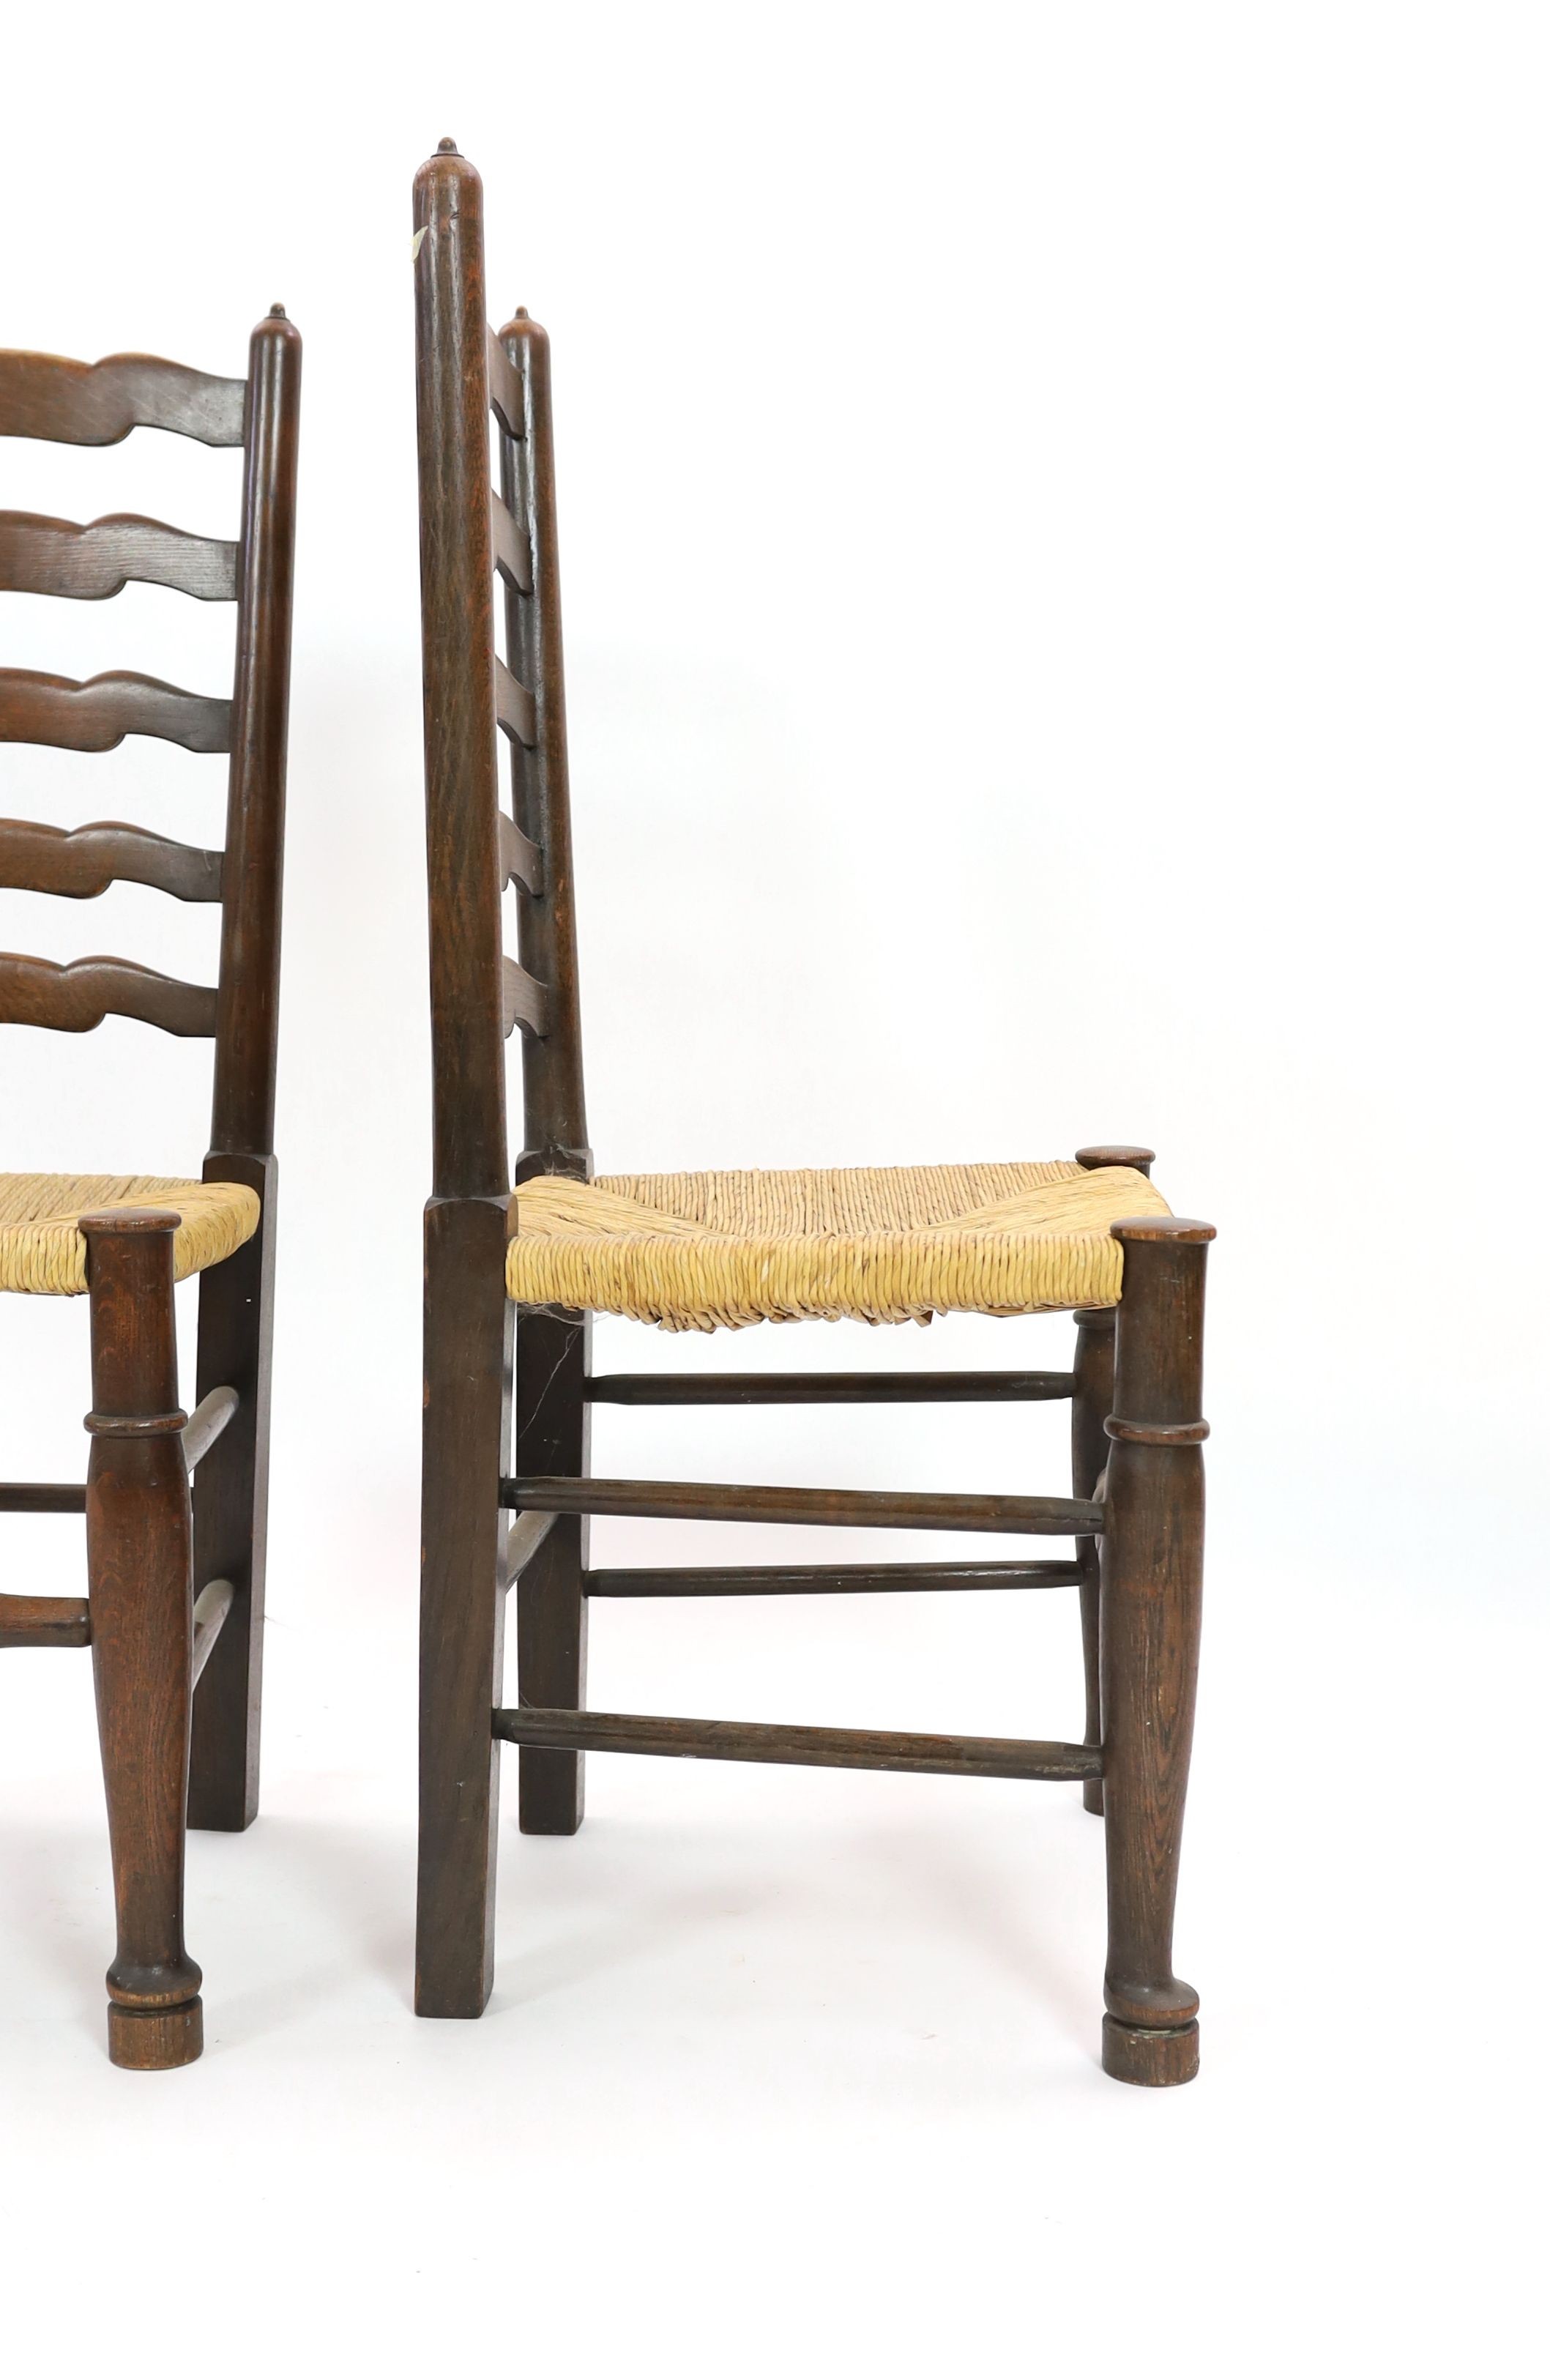 A pair of 18th century style rush seat oak ladderback dining chairs